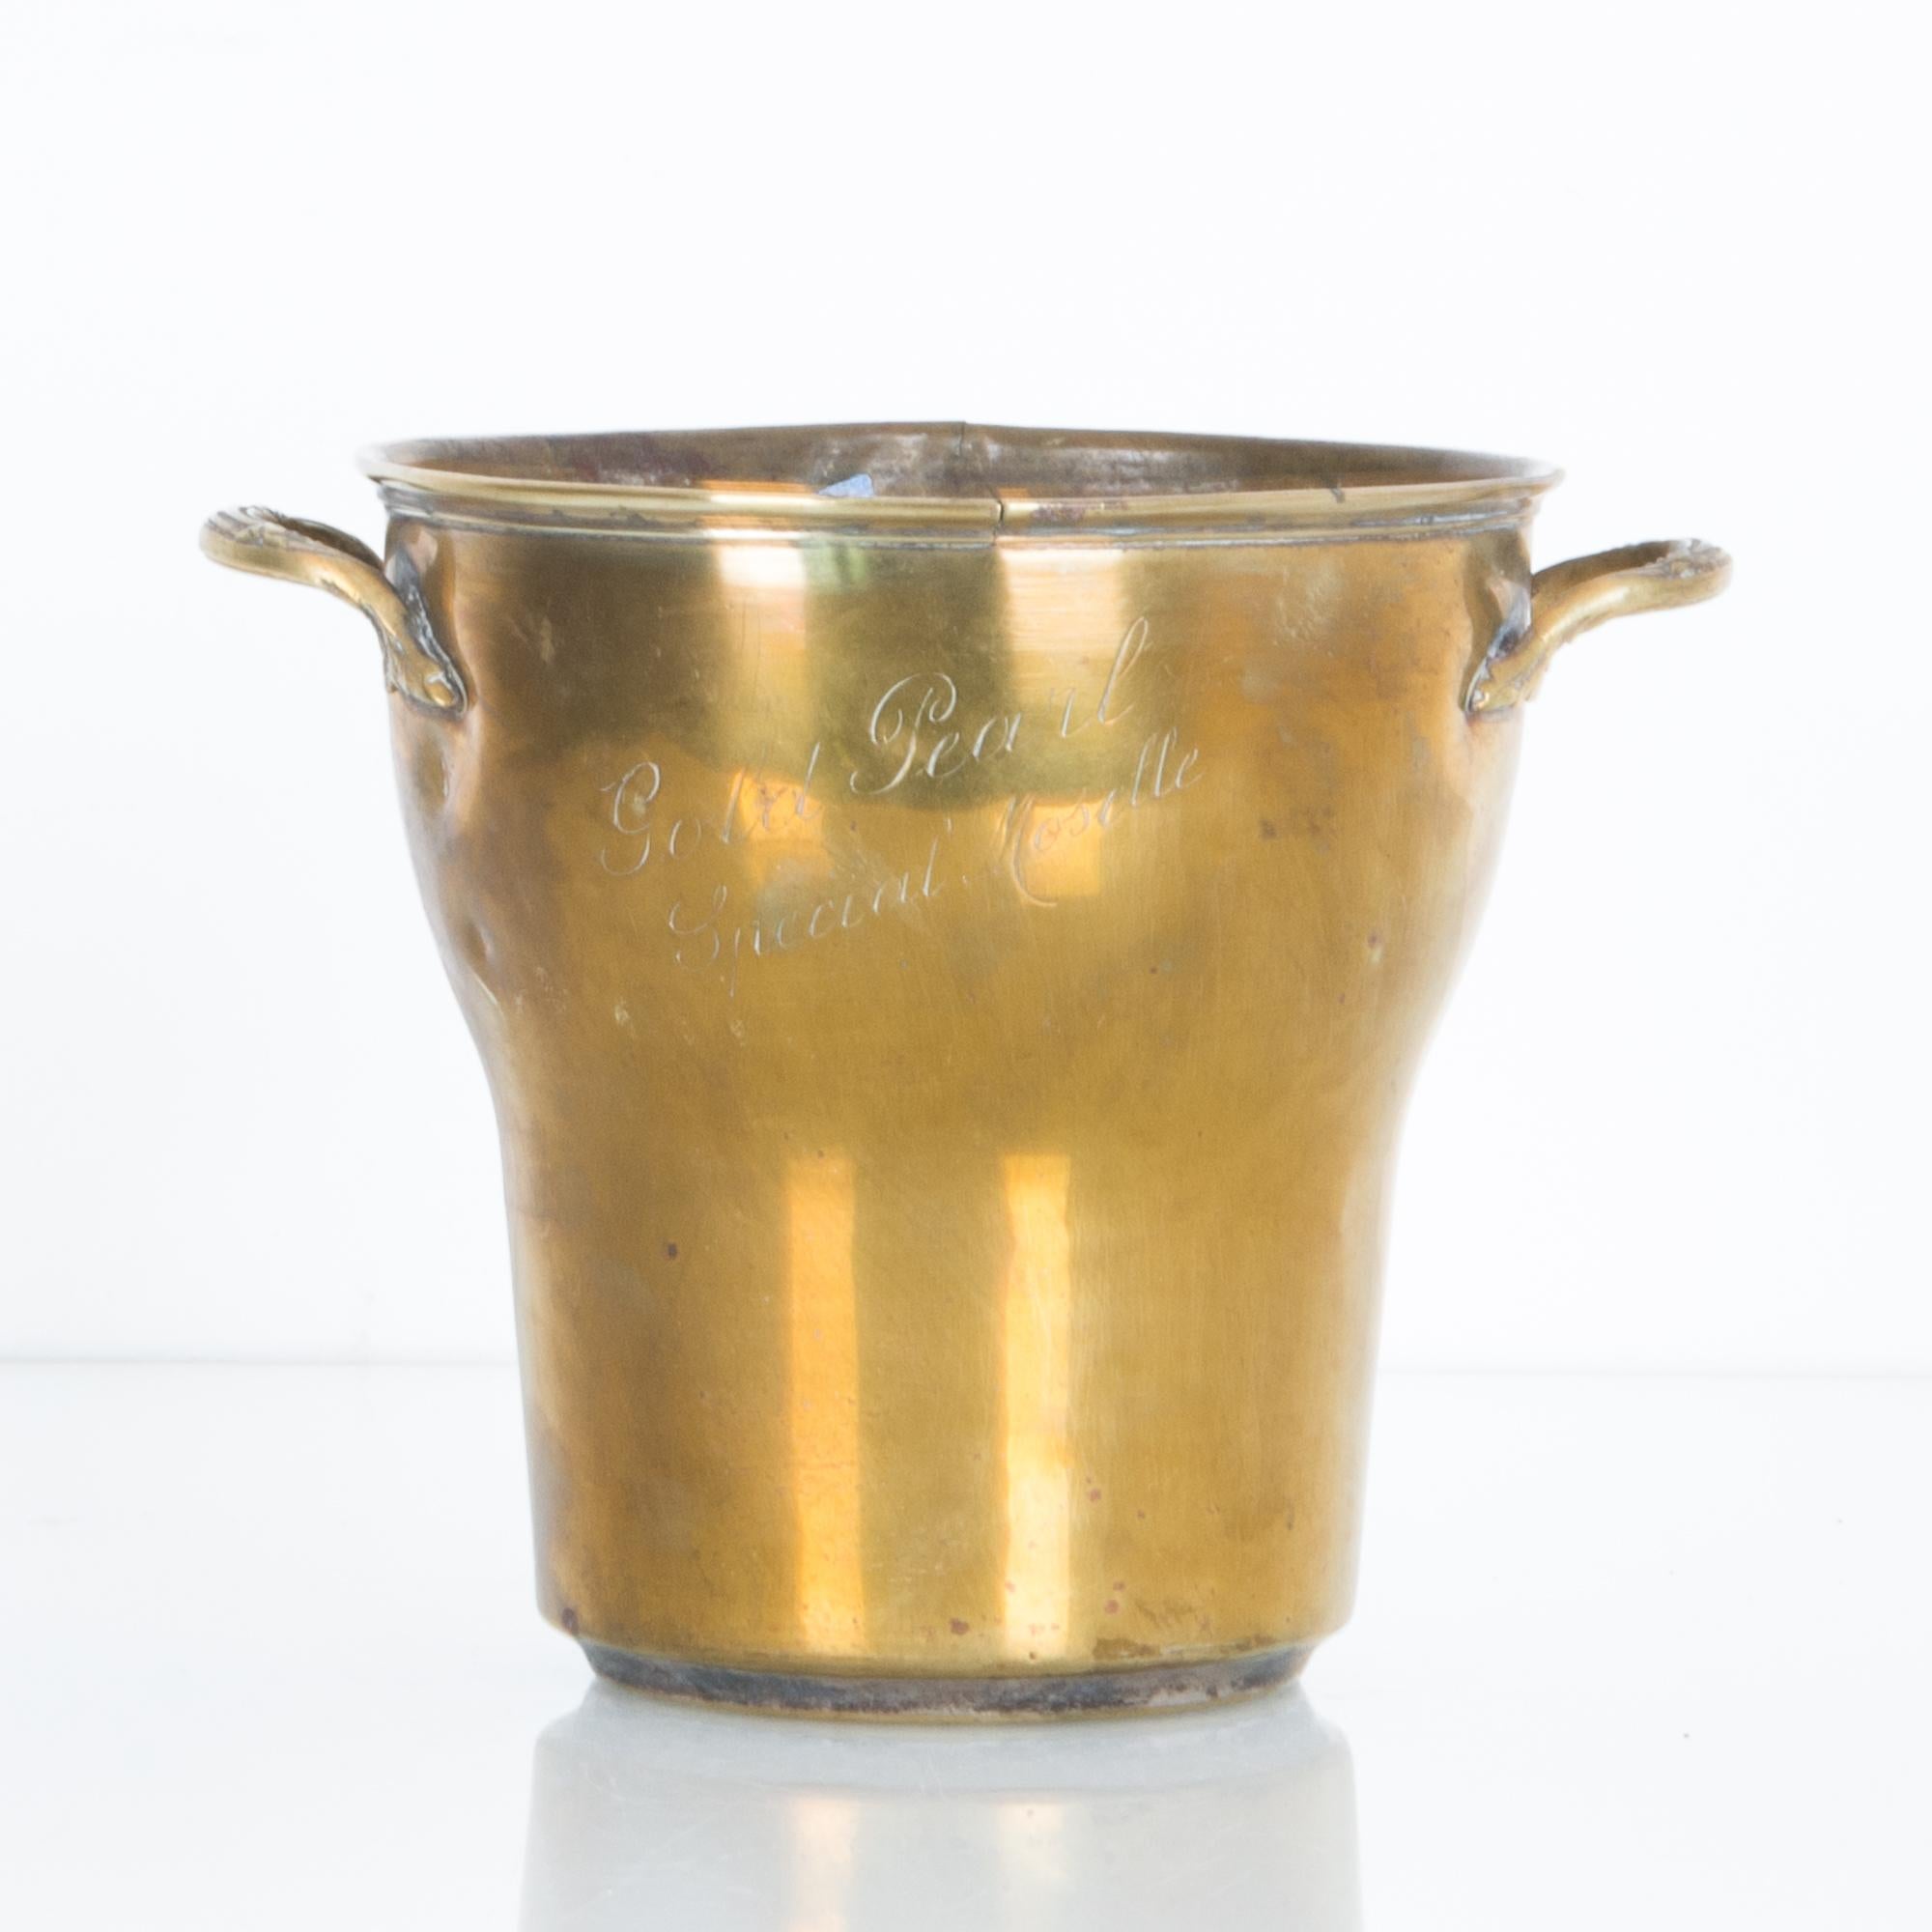 From before the era of refrigeration, this was an essential appliance for every party or quite evening of enjoyment. A simple design in this brass, embossed with the name “Gold Pearl” to commemorate a memorable vintage, a special wine from the